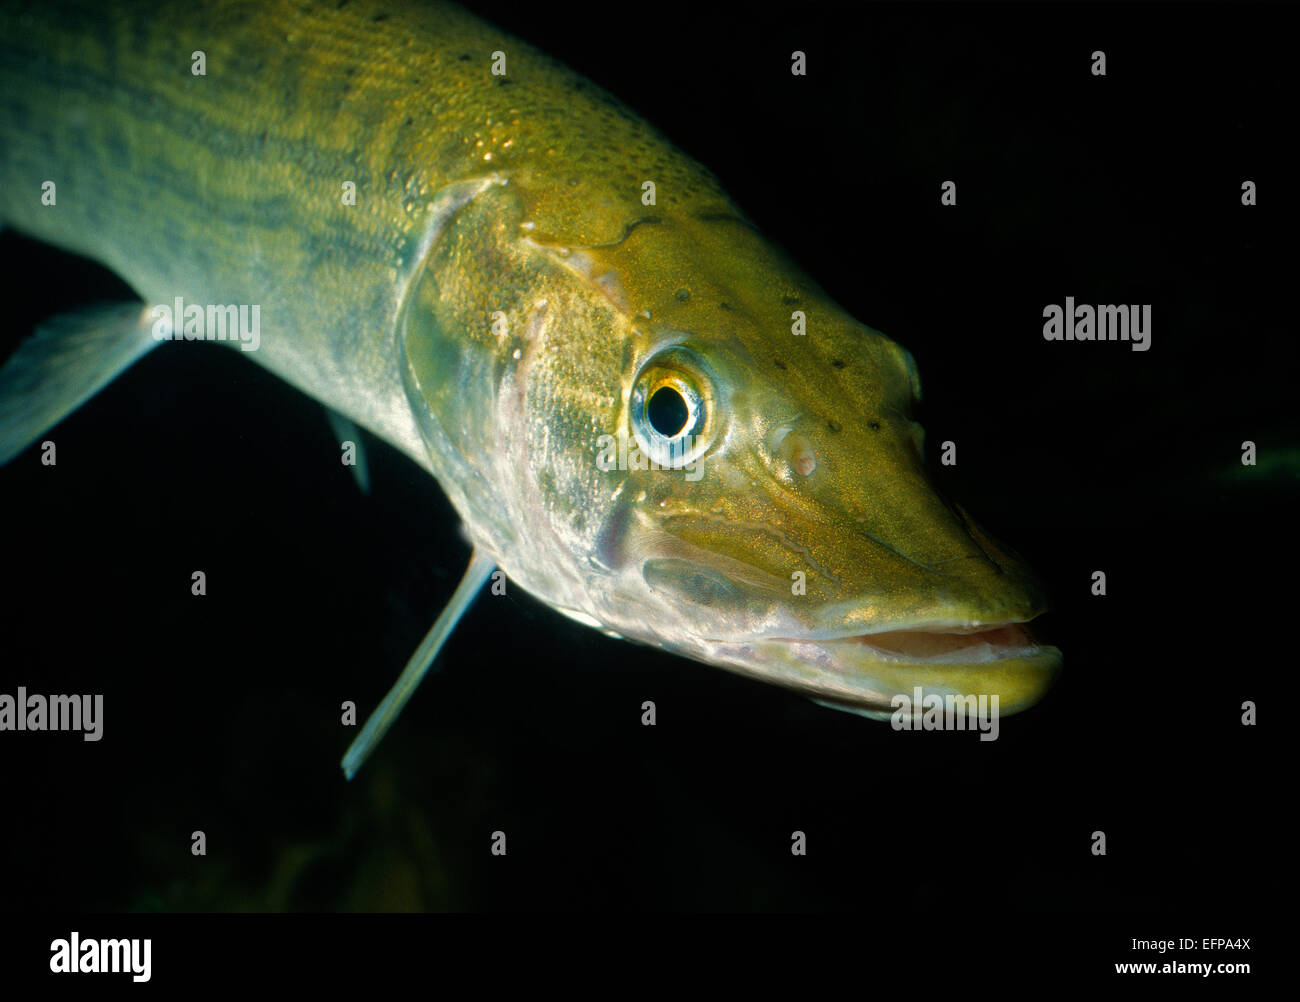 Northern pike Esox lucius, Esocidae, Europe Stock Photo